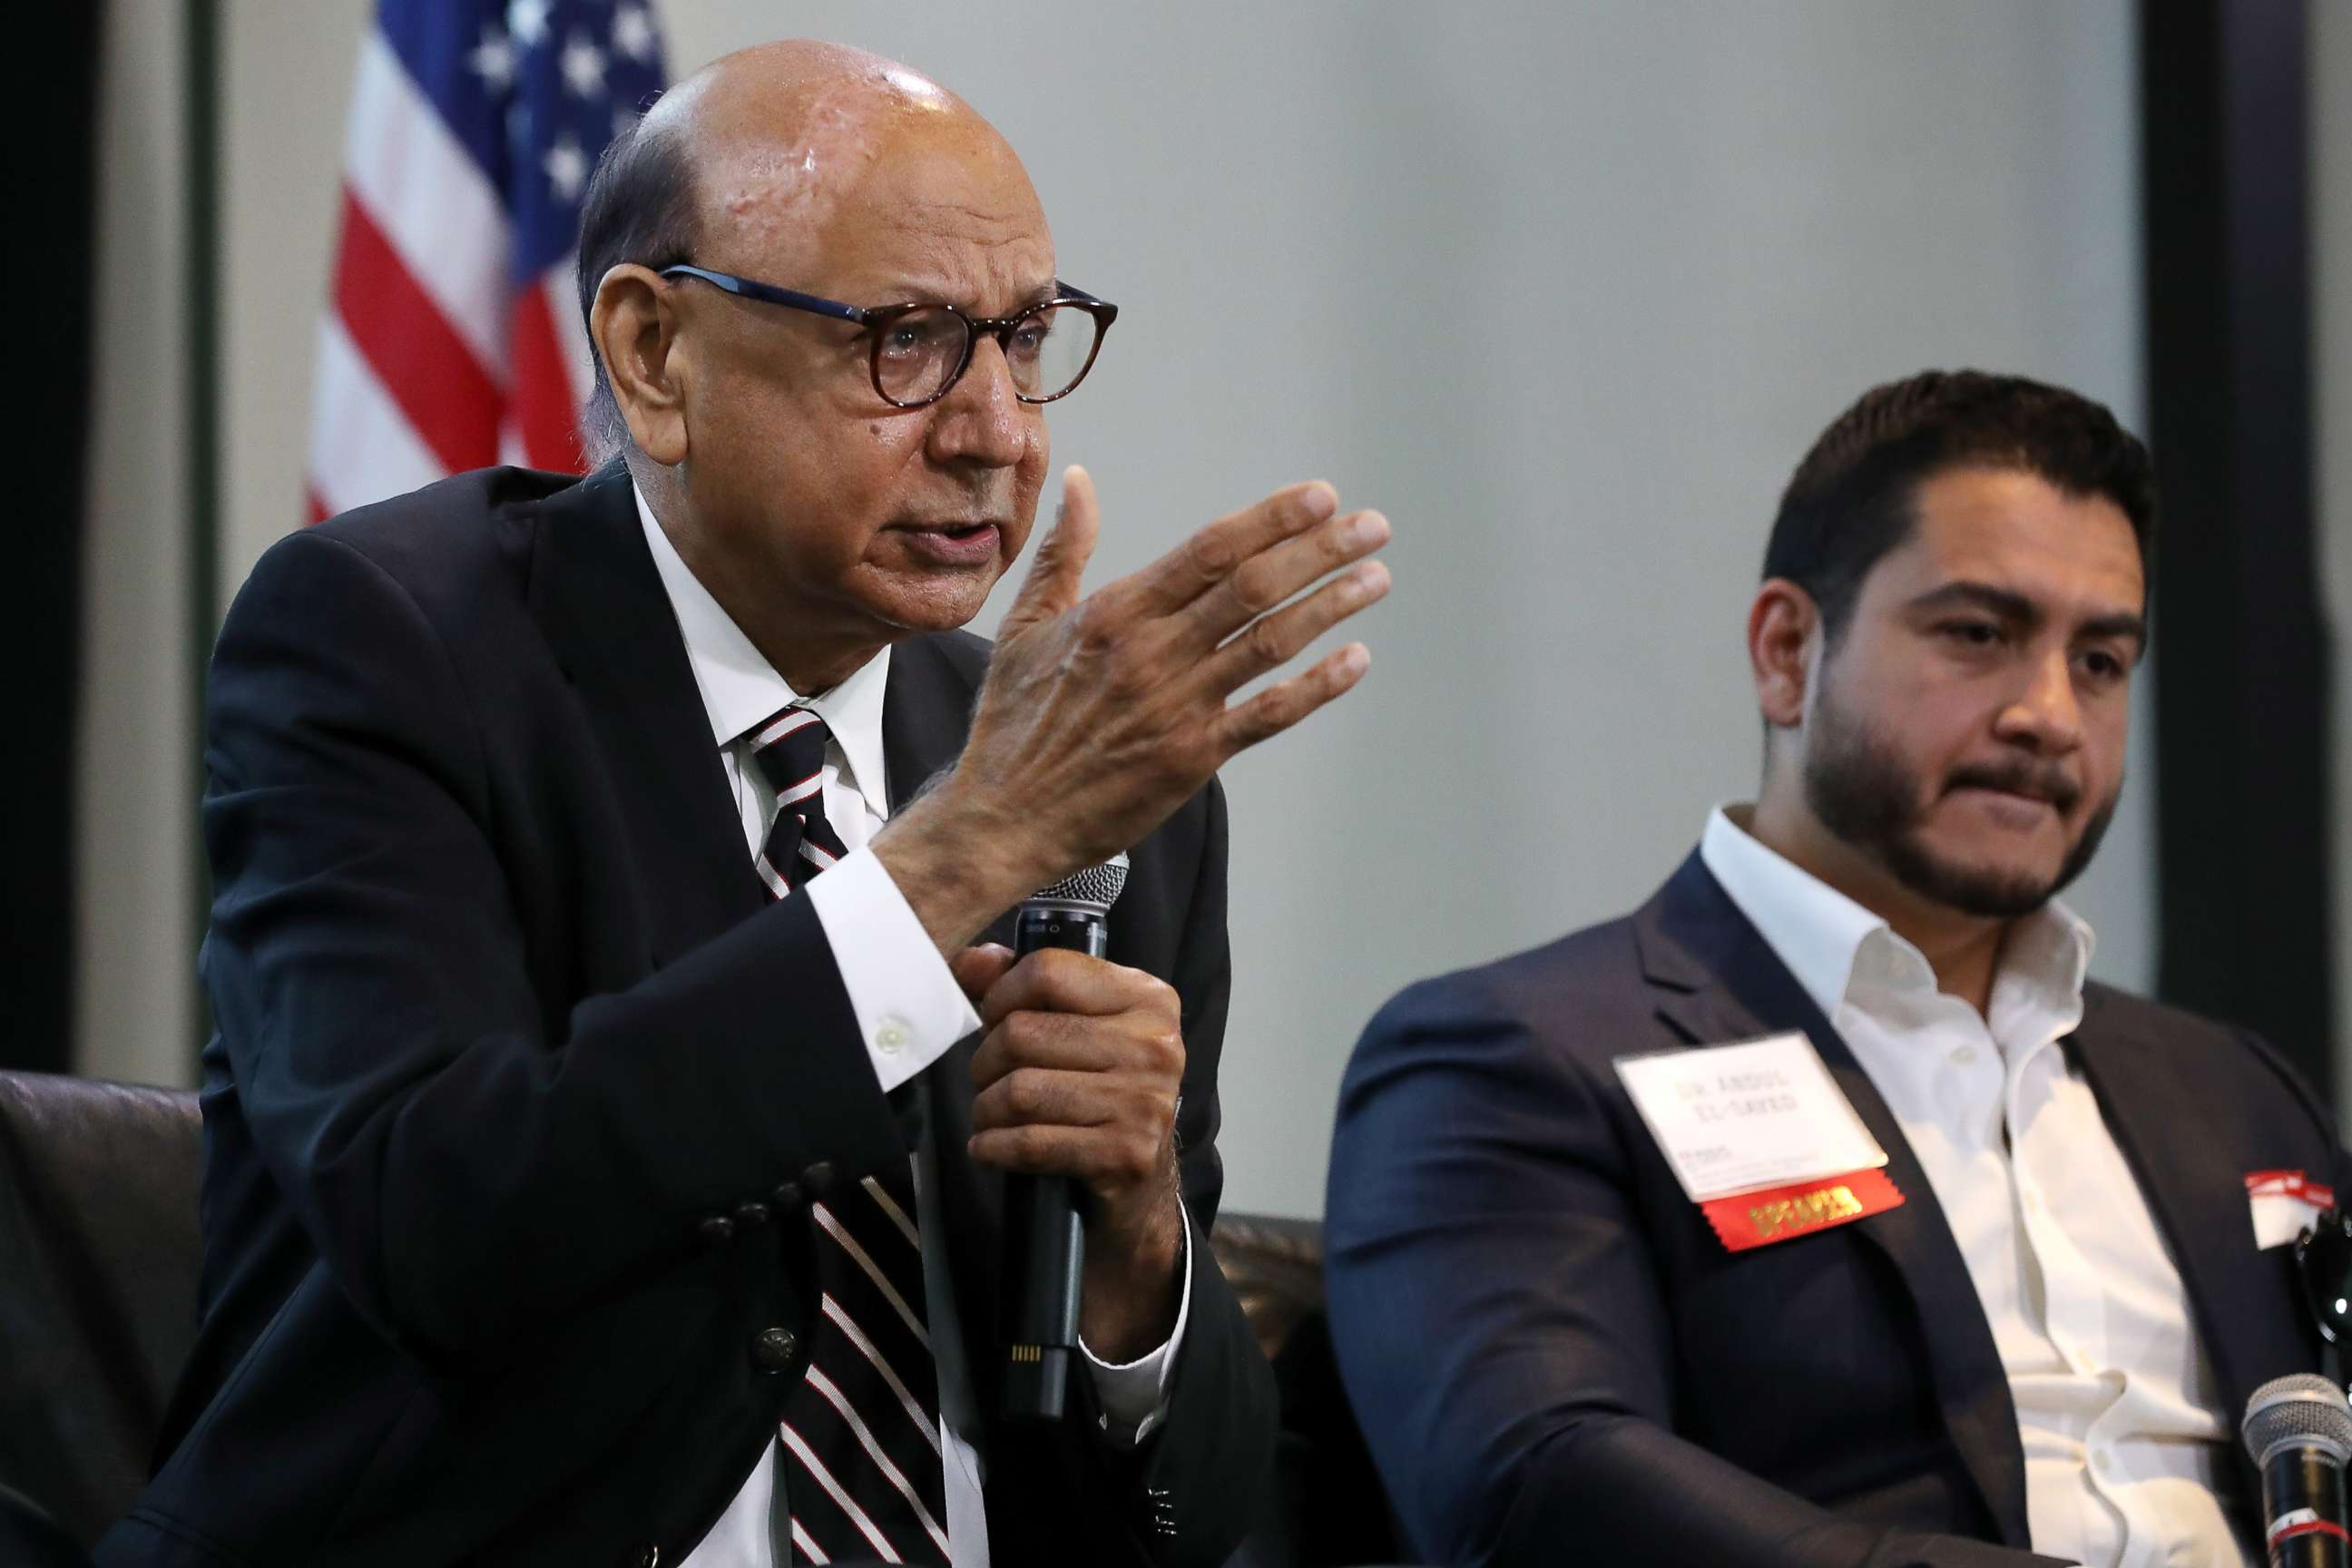 PHOTO: Gold Star father Khizr Khan speaks while participating in a panel discussion with Dr. Abdul El Sayed during the Muslim Collective For Equitable Democracy Conference and Presidential Forum, July 23, 2019, in Washington.